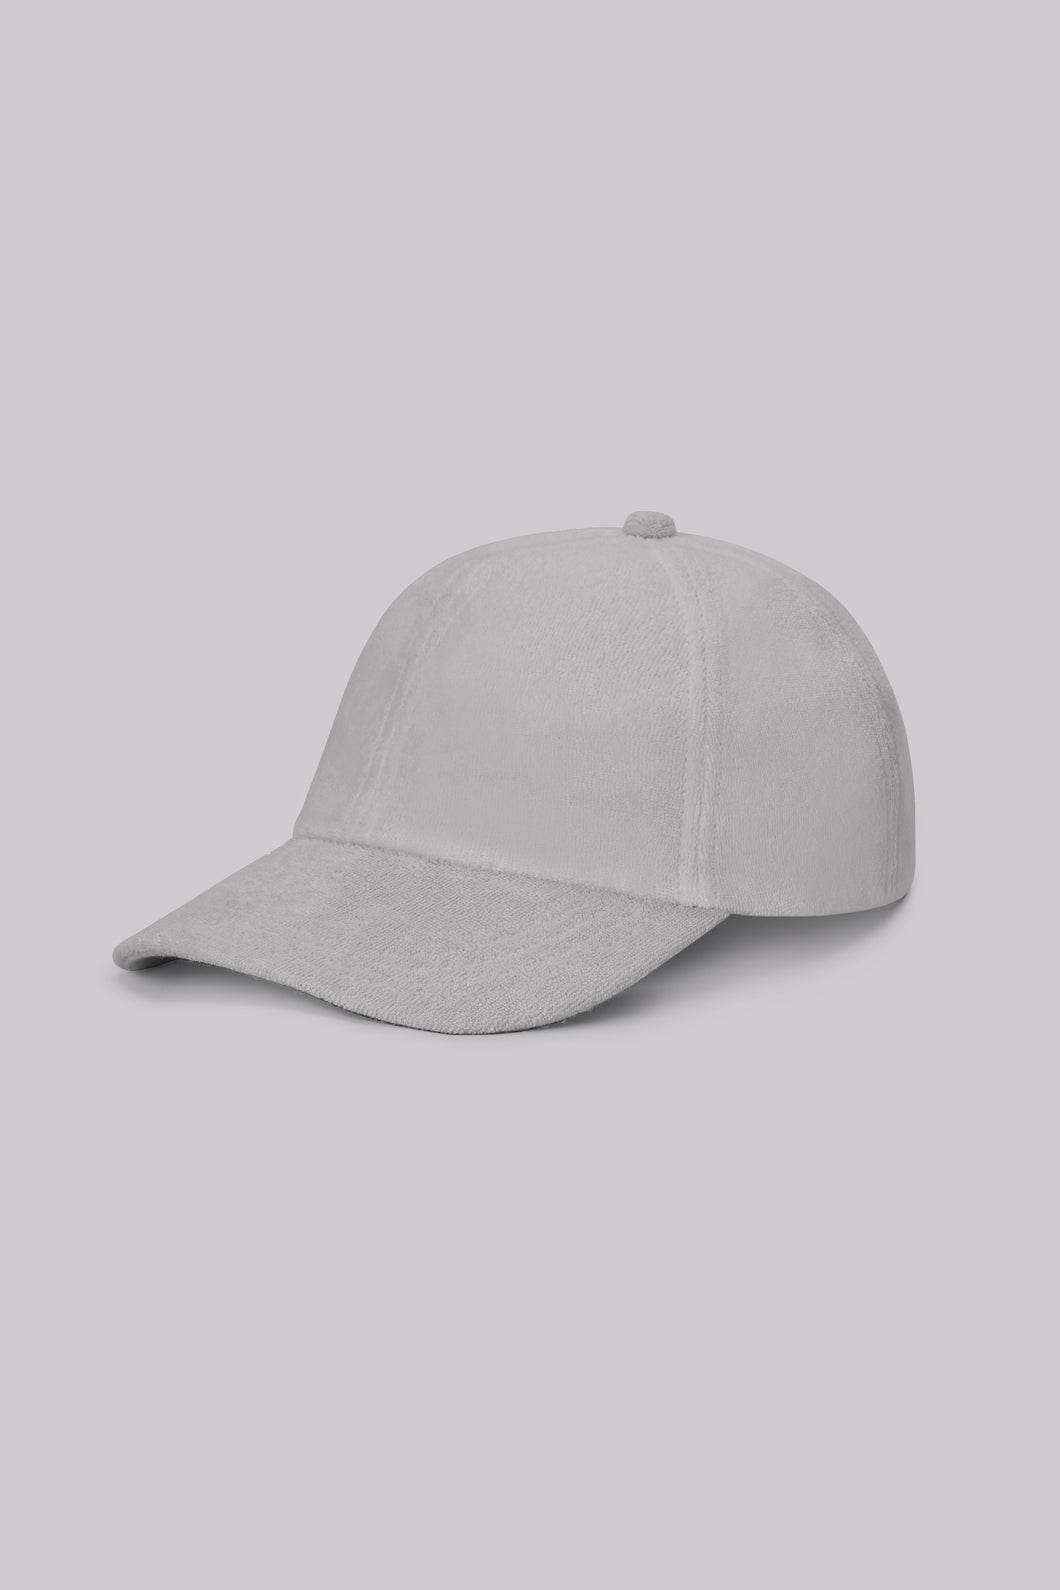 Terry Cloth Hat - Gstaad Grey